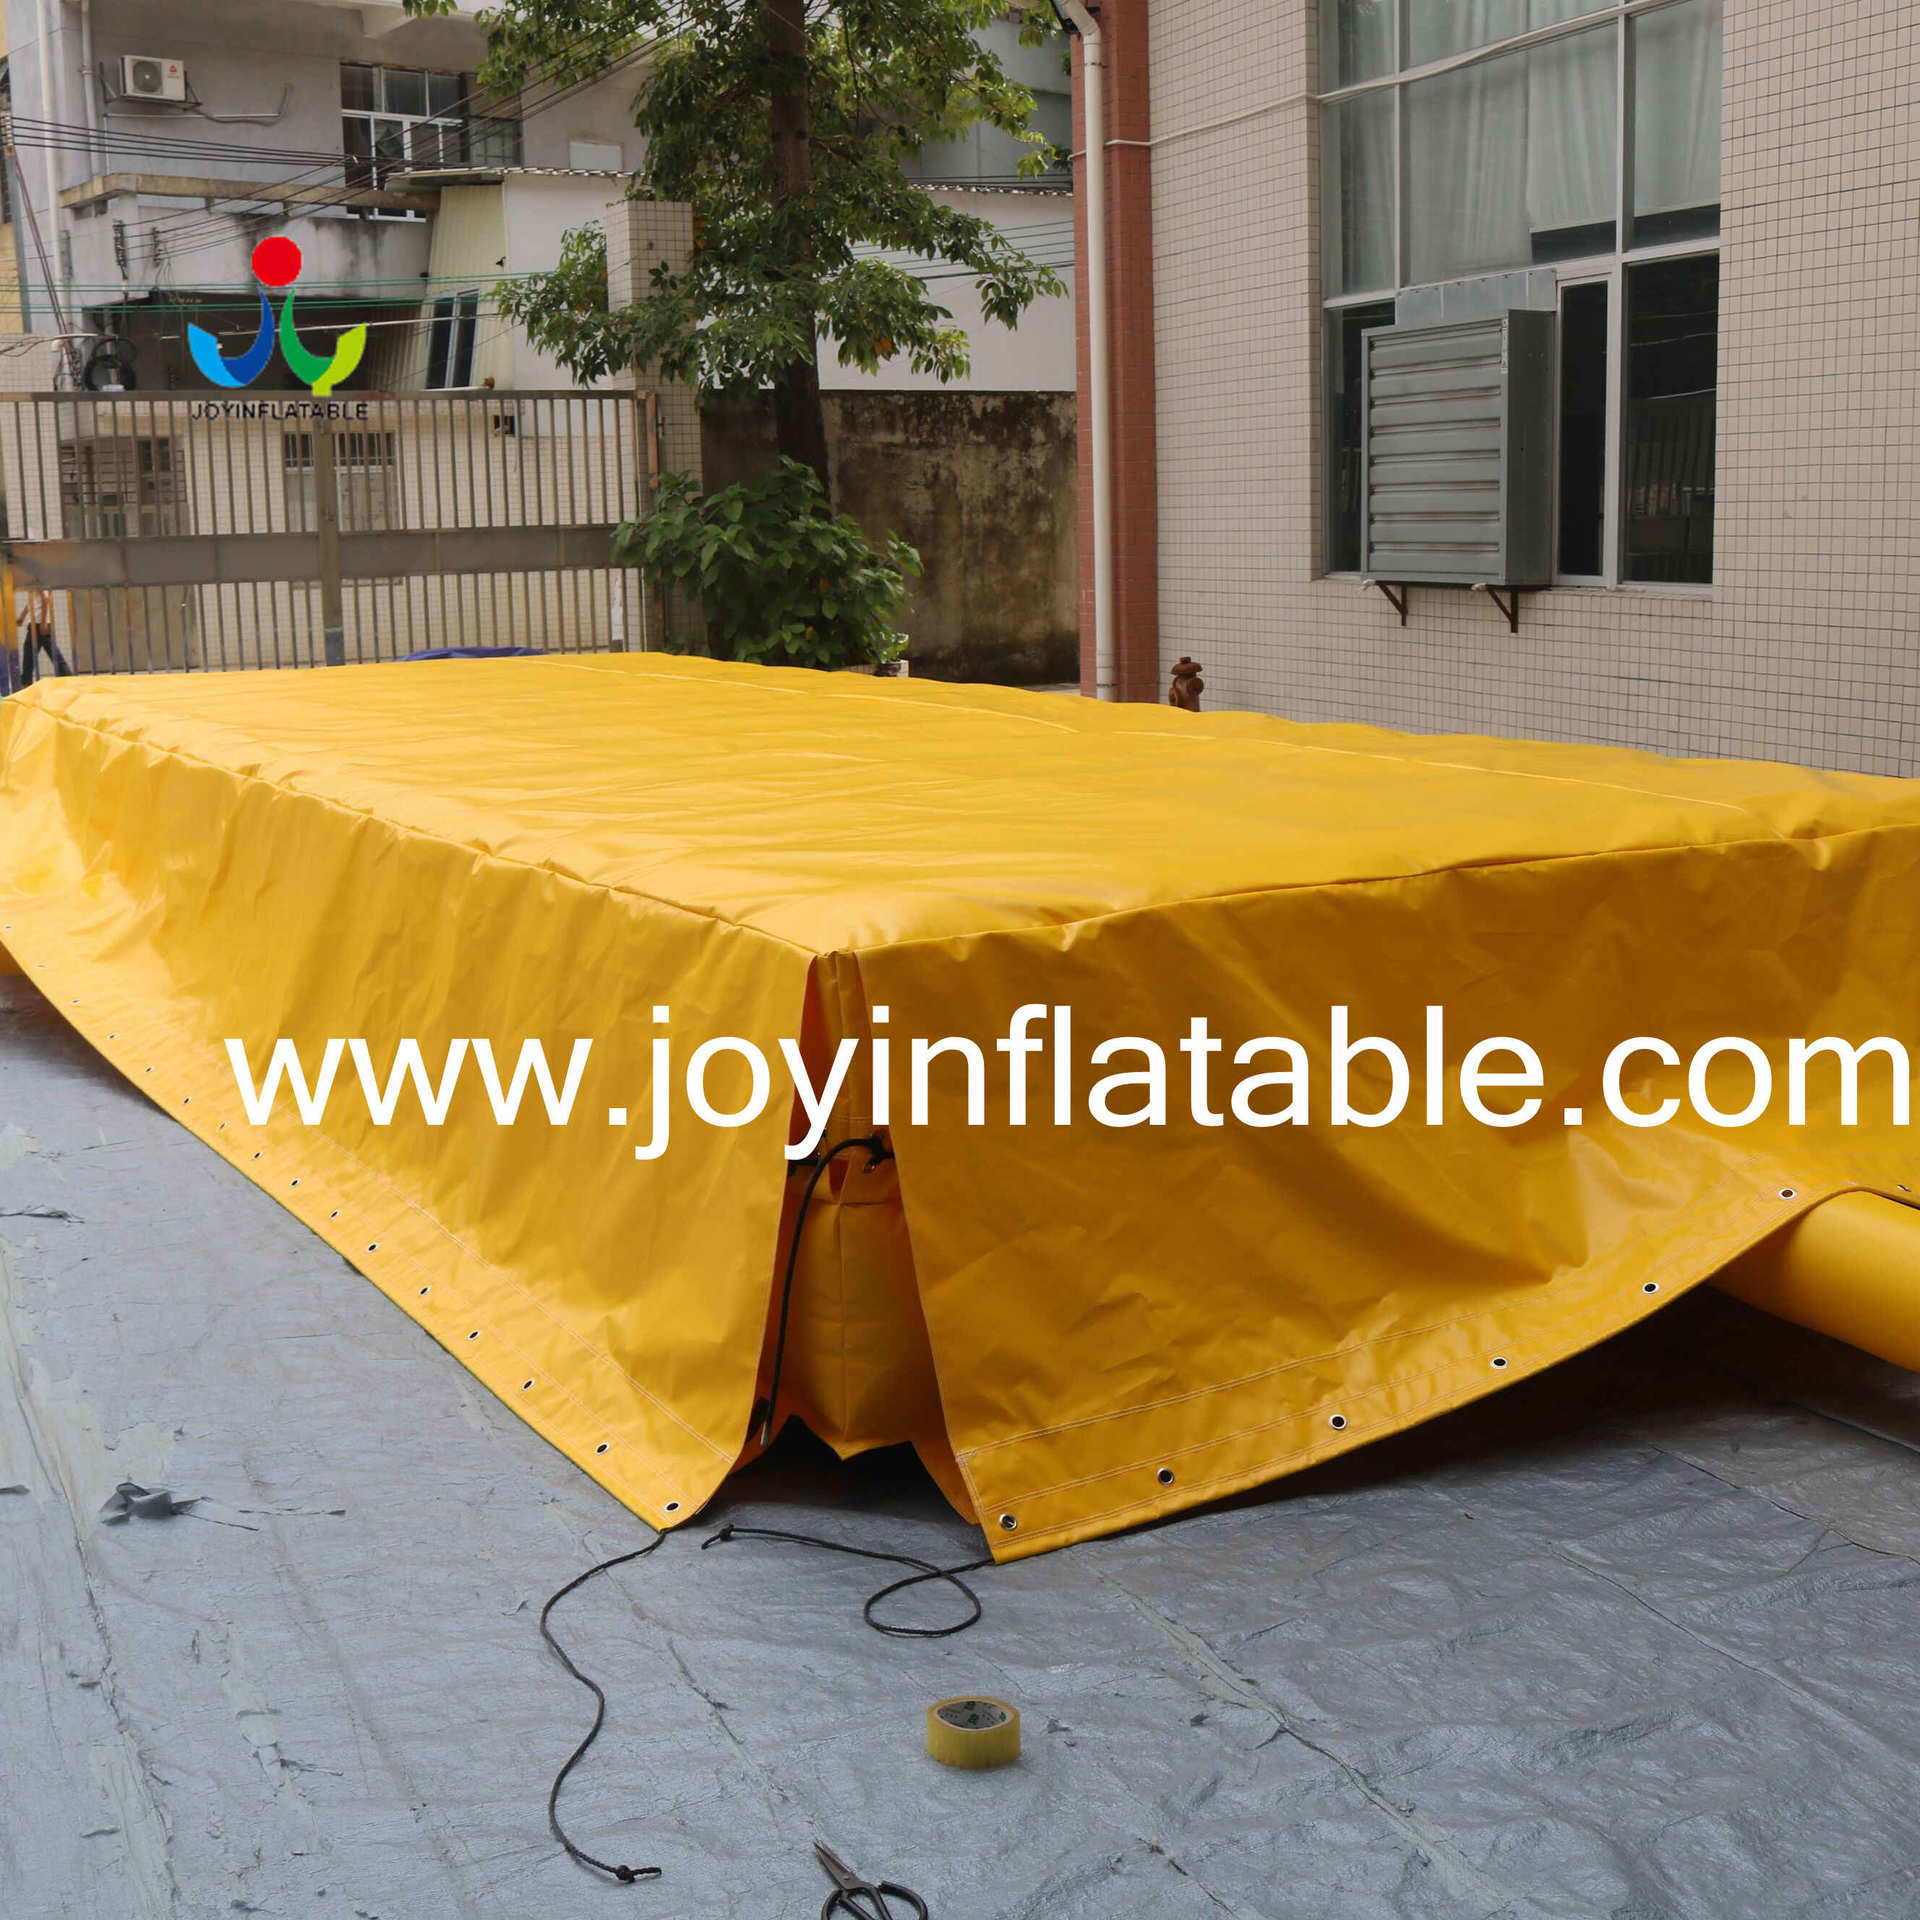 JOY inflatable stunt landing mats customized for outdoor